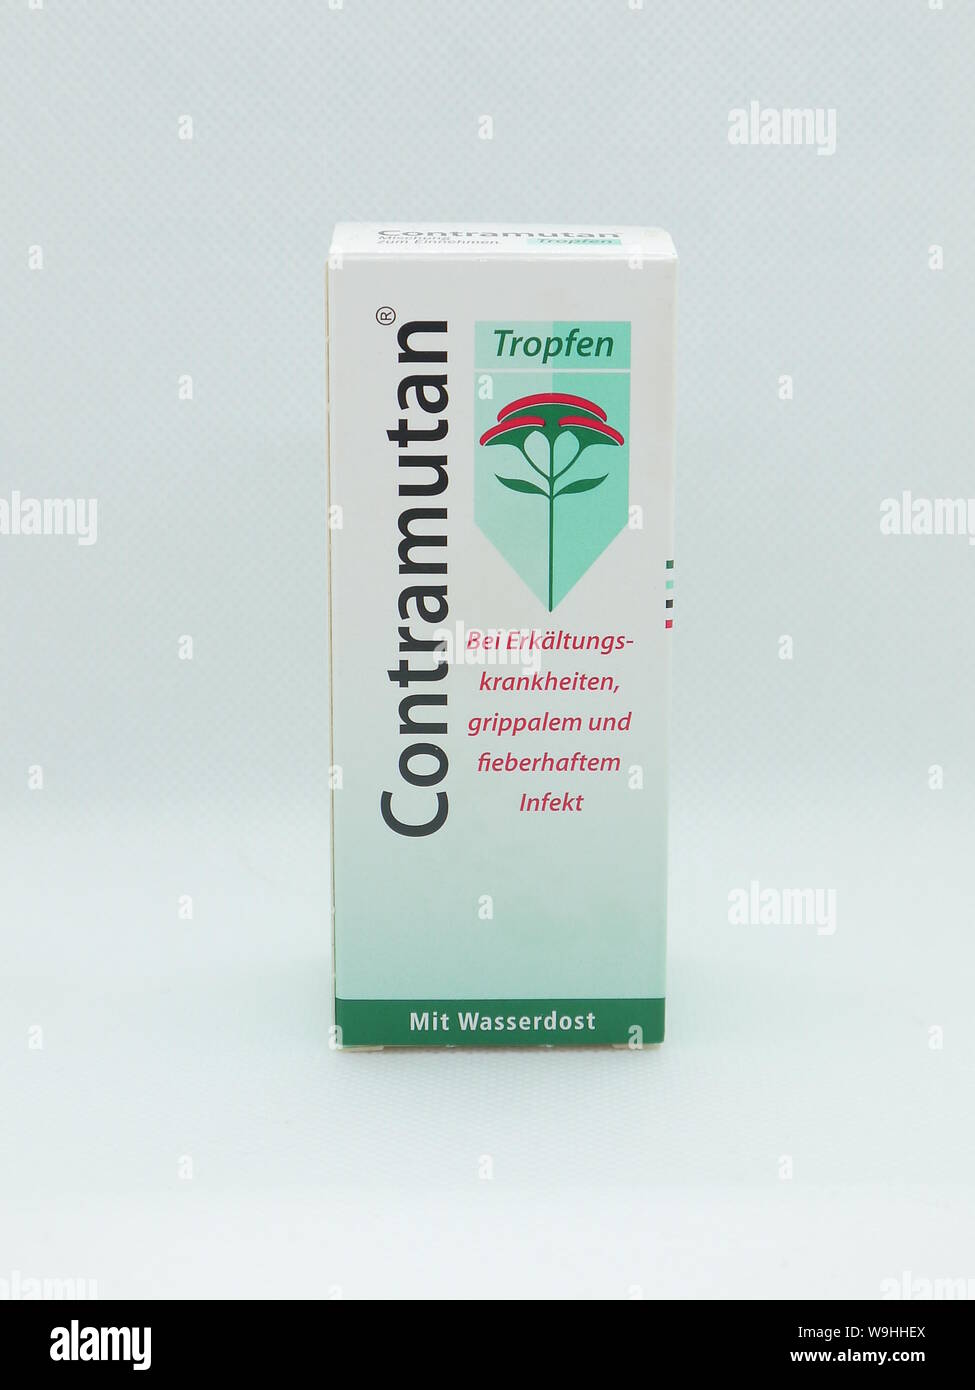 Berlin, Germany - 2019: Contramutan. Text in german:  Drops. In colds, influenza and feverish infectious. Stock Photo